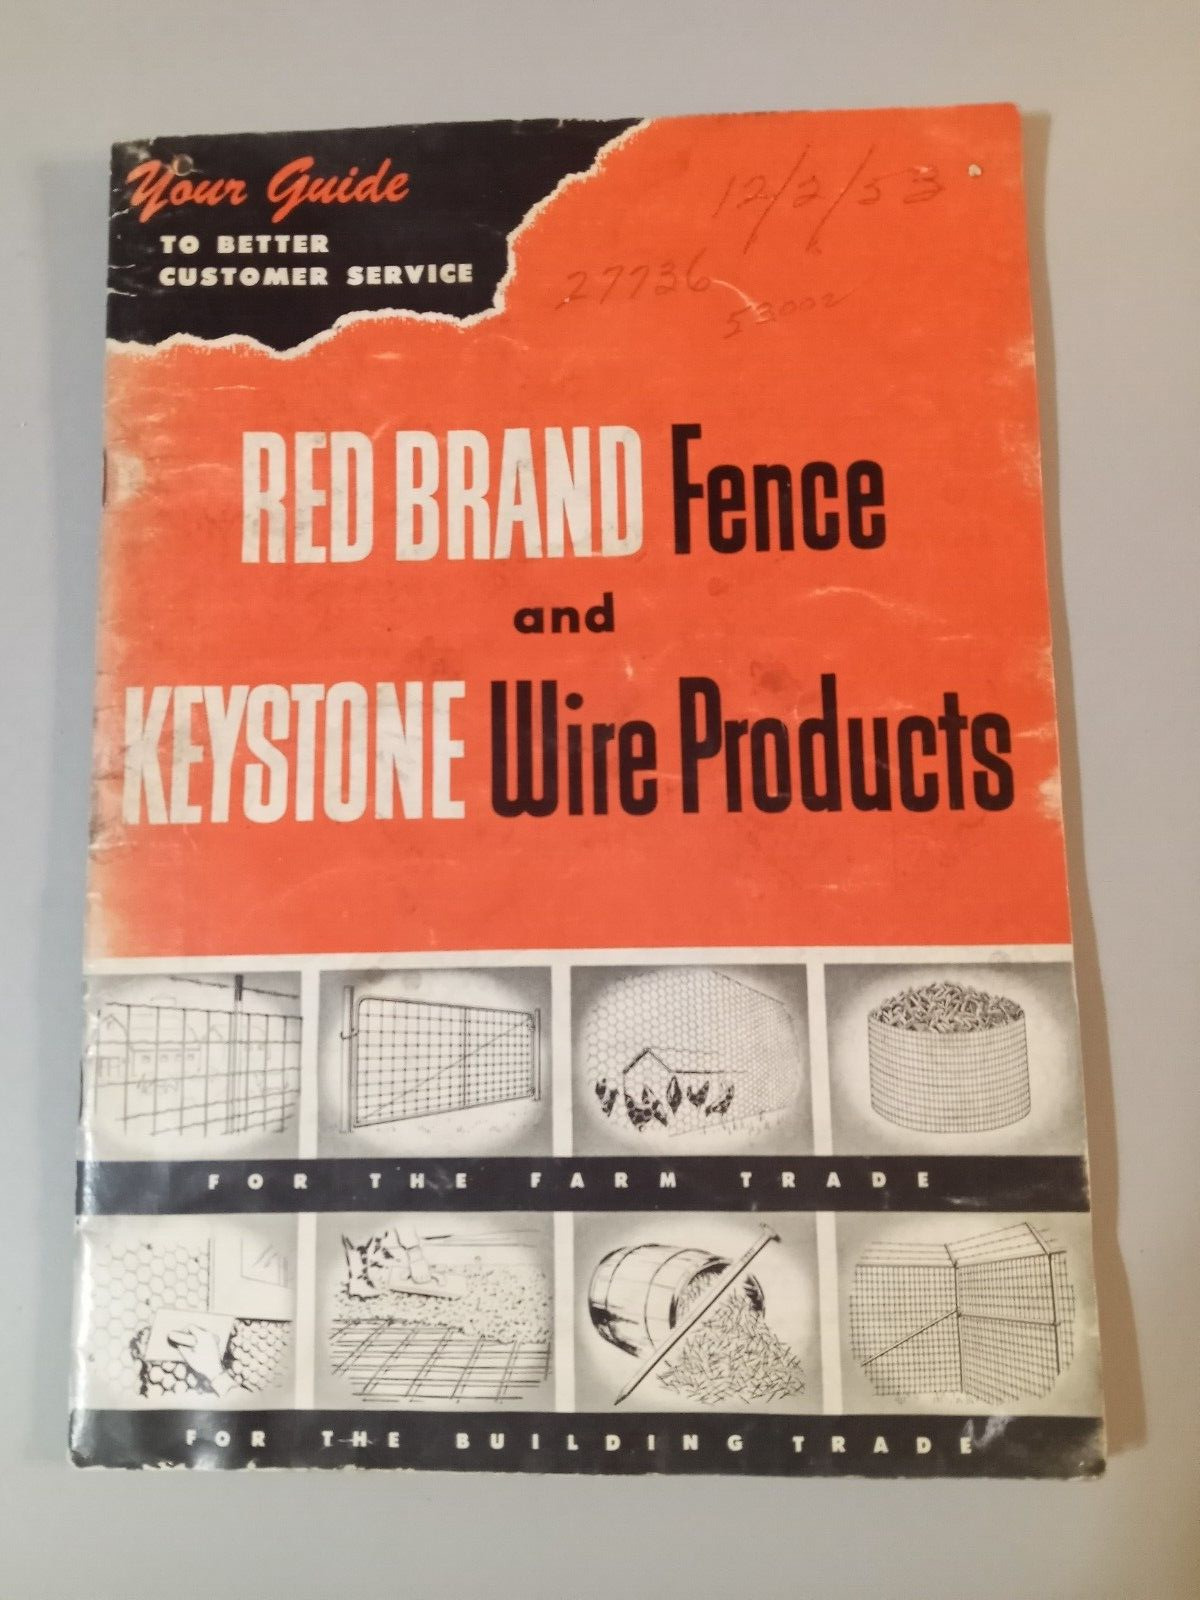 Vintage 1953 RED BRAND Fence & KEYSTONE Wire Products Wholesale Catalog